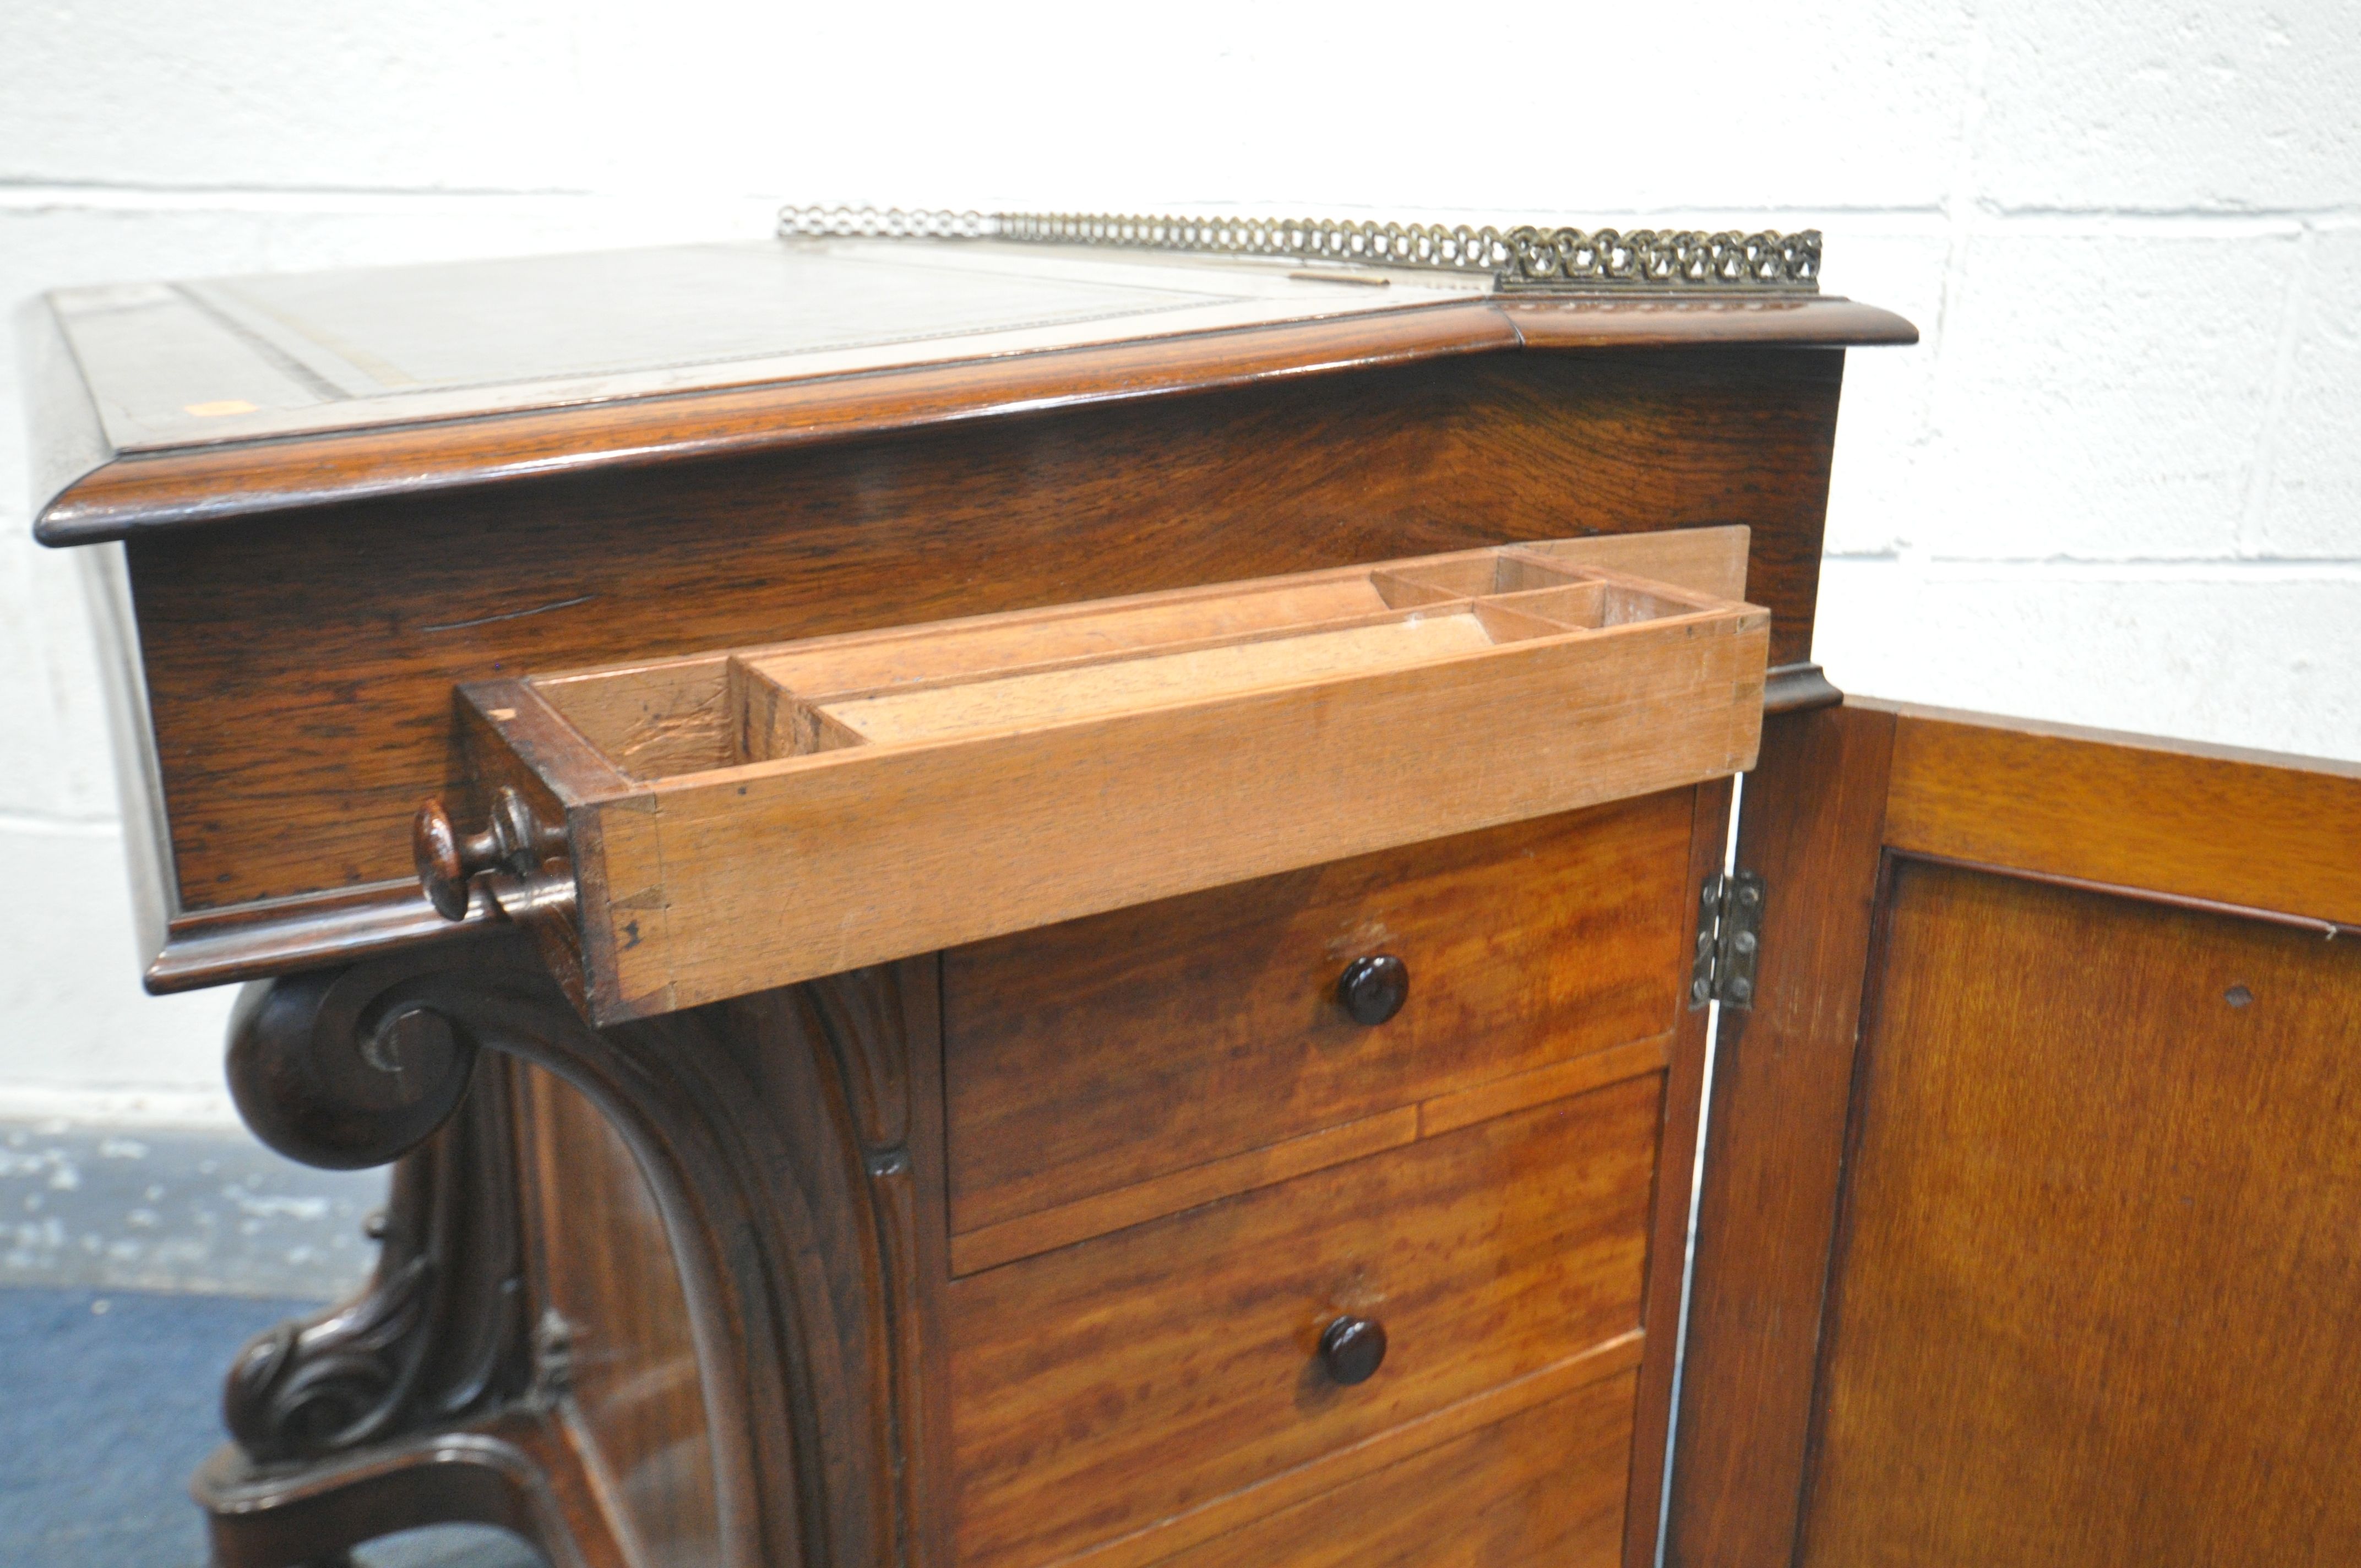 AN EARLY 19TH CENTURY ROSEWOOD DAVENPORT DESK, having a brass open fretwork gallery behind a leather - Image 8 of 9